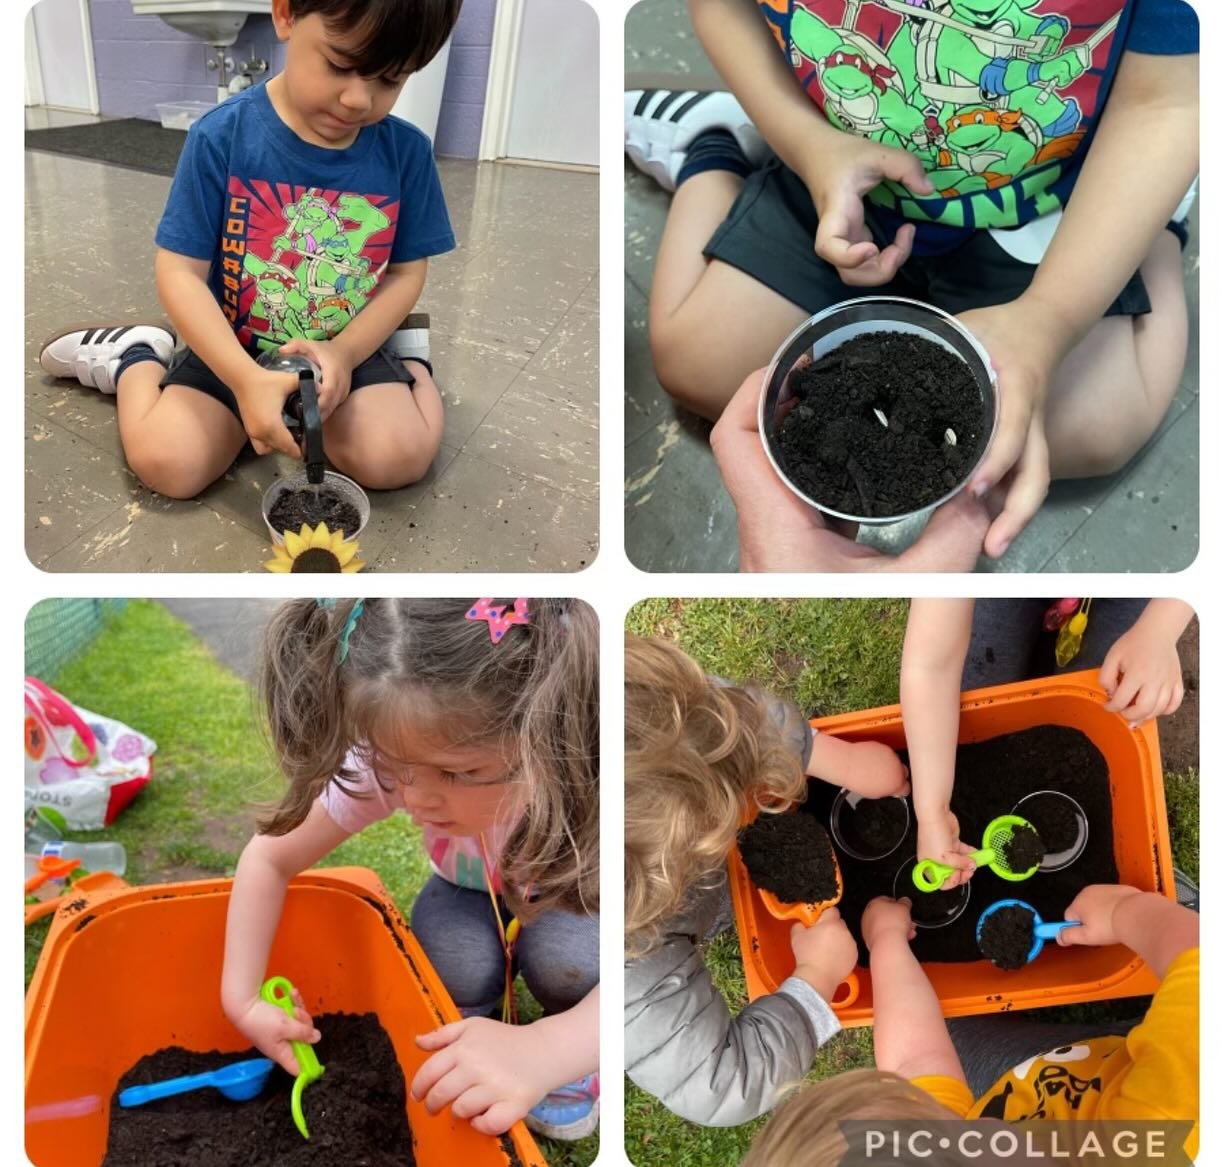 Giraffes enjoy hands-on learning as they plant mammoth sunflower seeds, use blocks to make bird houses and arrange flowers at the sand table.&nbsp;&nbsp;#foundationsprepschool #foundations #fps #funandlearning #giraffeclass #tinyhumans #earlychildhoo